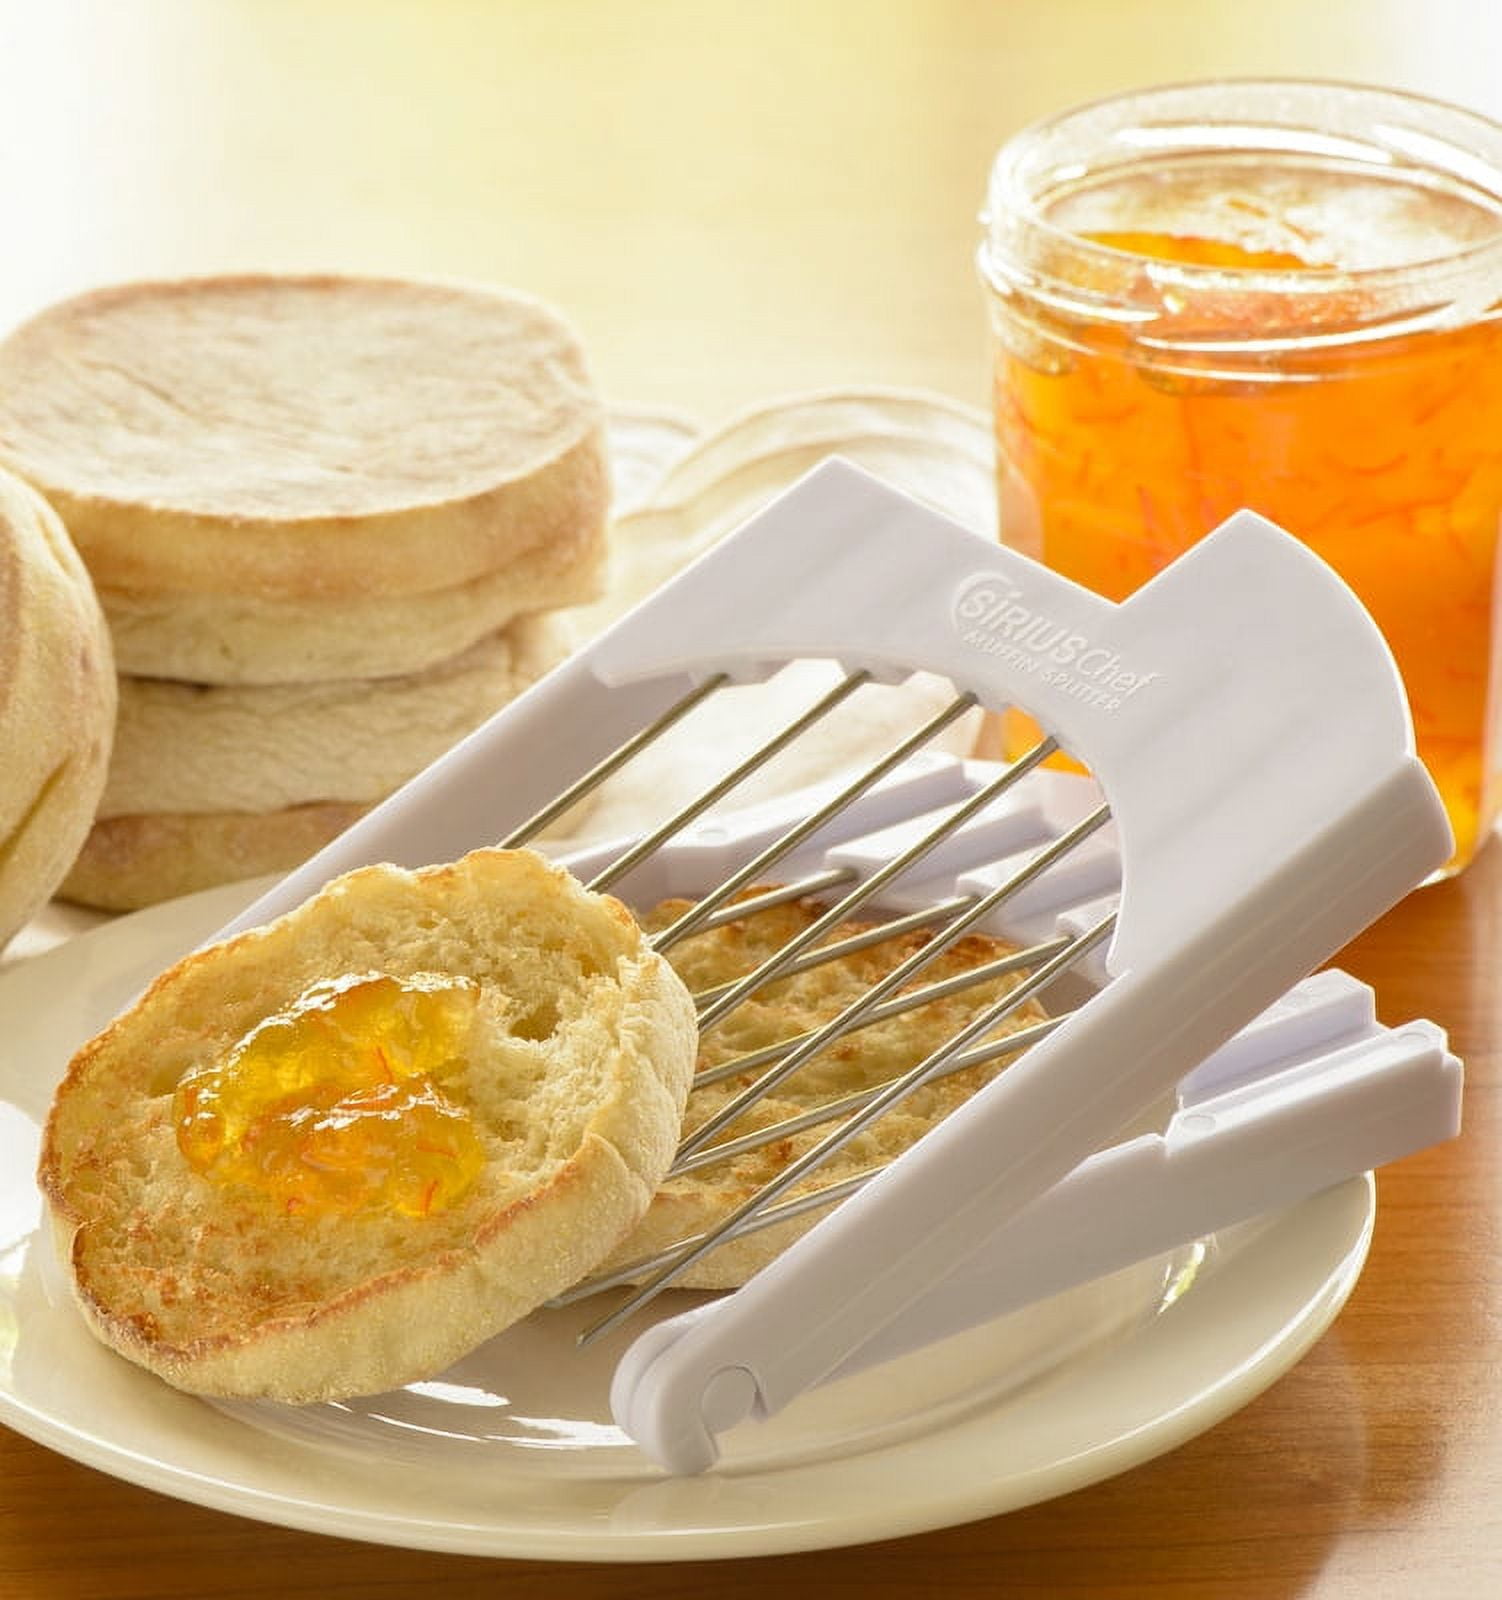 English Muffin Splitter by Sirius Chef - White handles with stainless steel  tines - Crumpet, Muffin and Biscuit Splitter